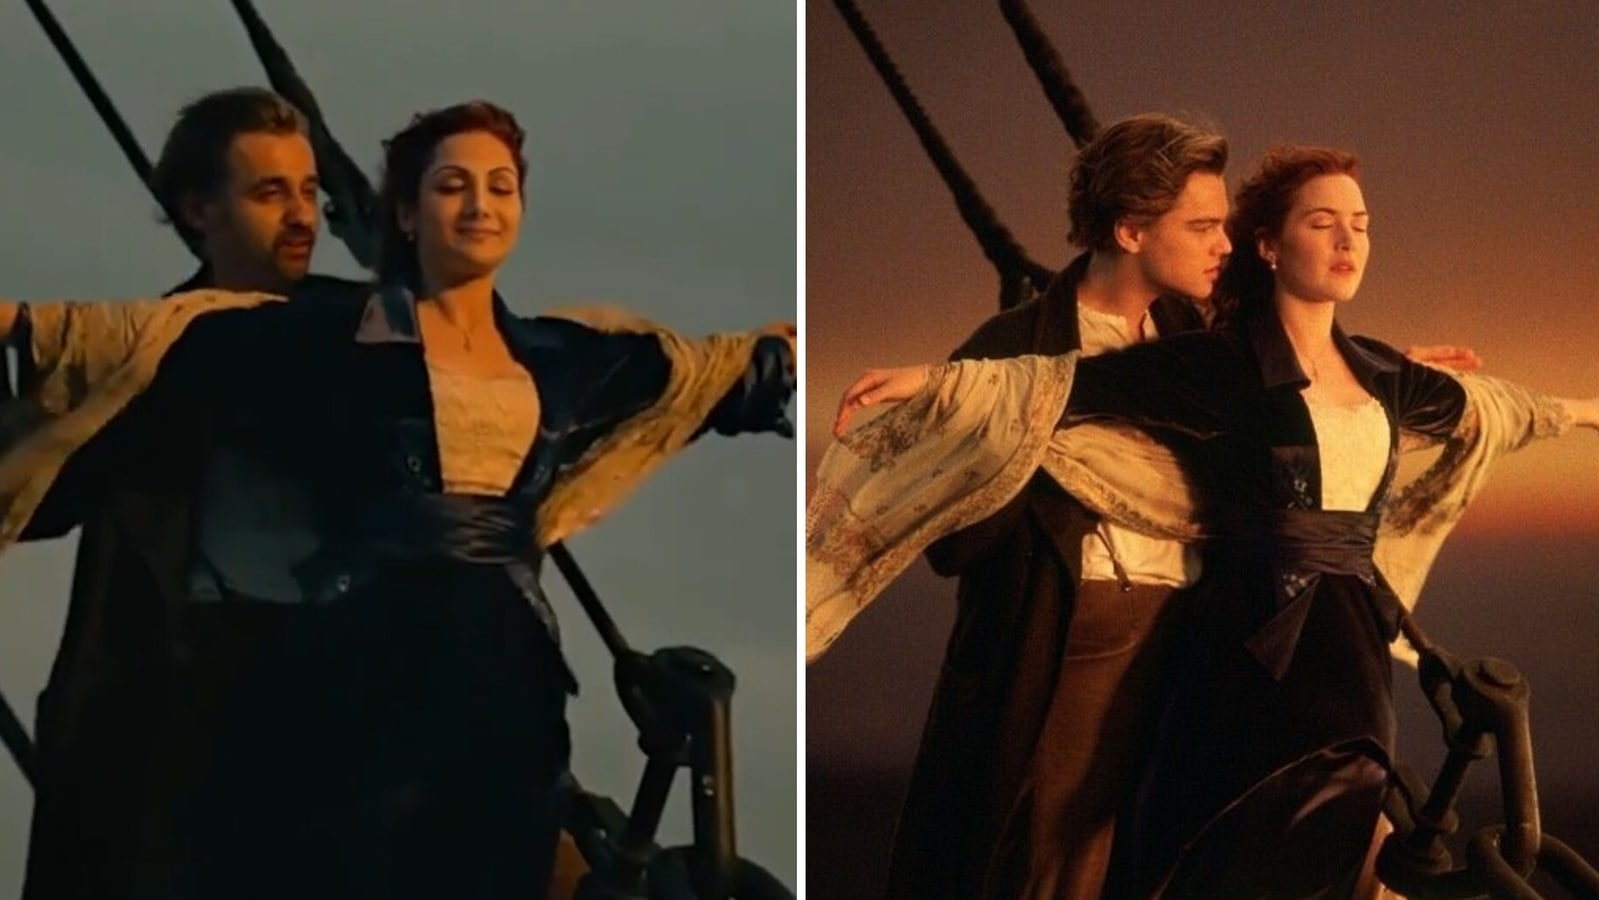 12 'Titanic' Movie Facts You Probably Didn't Know